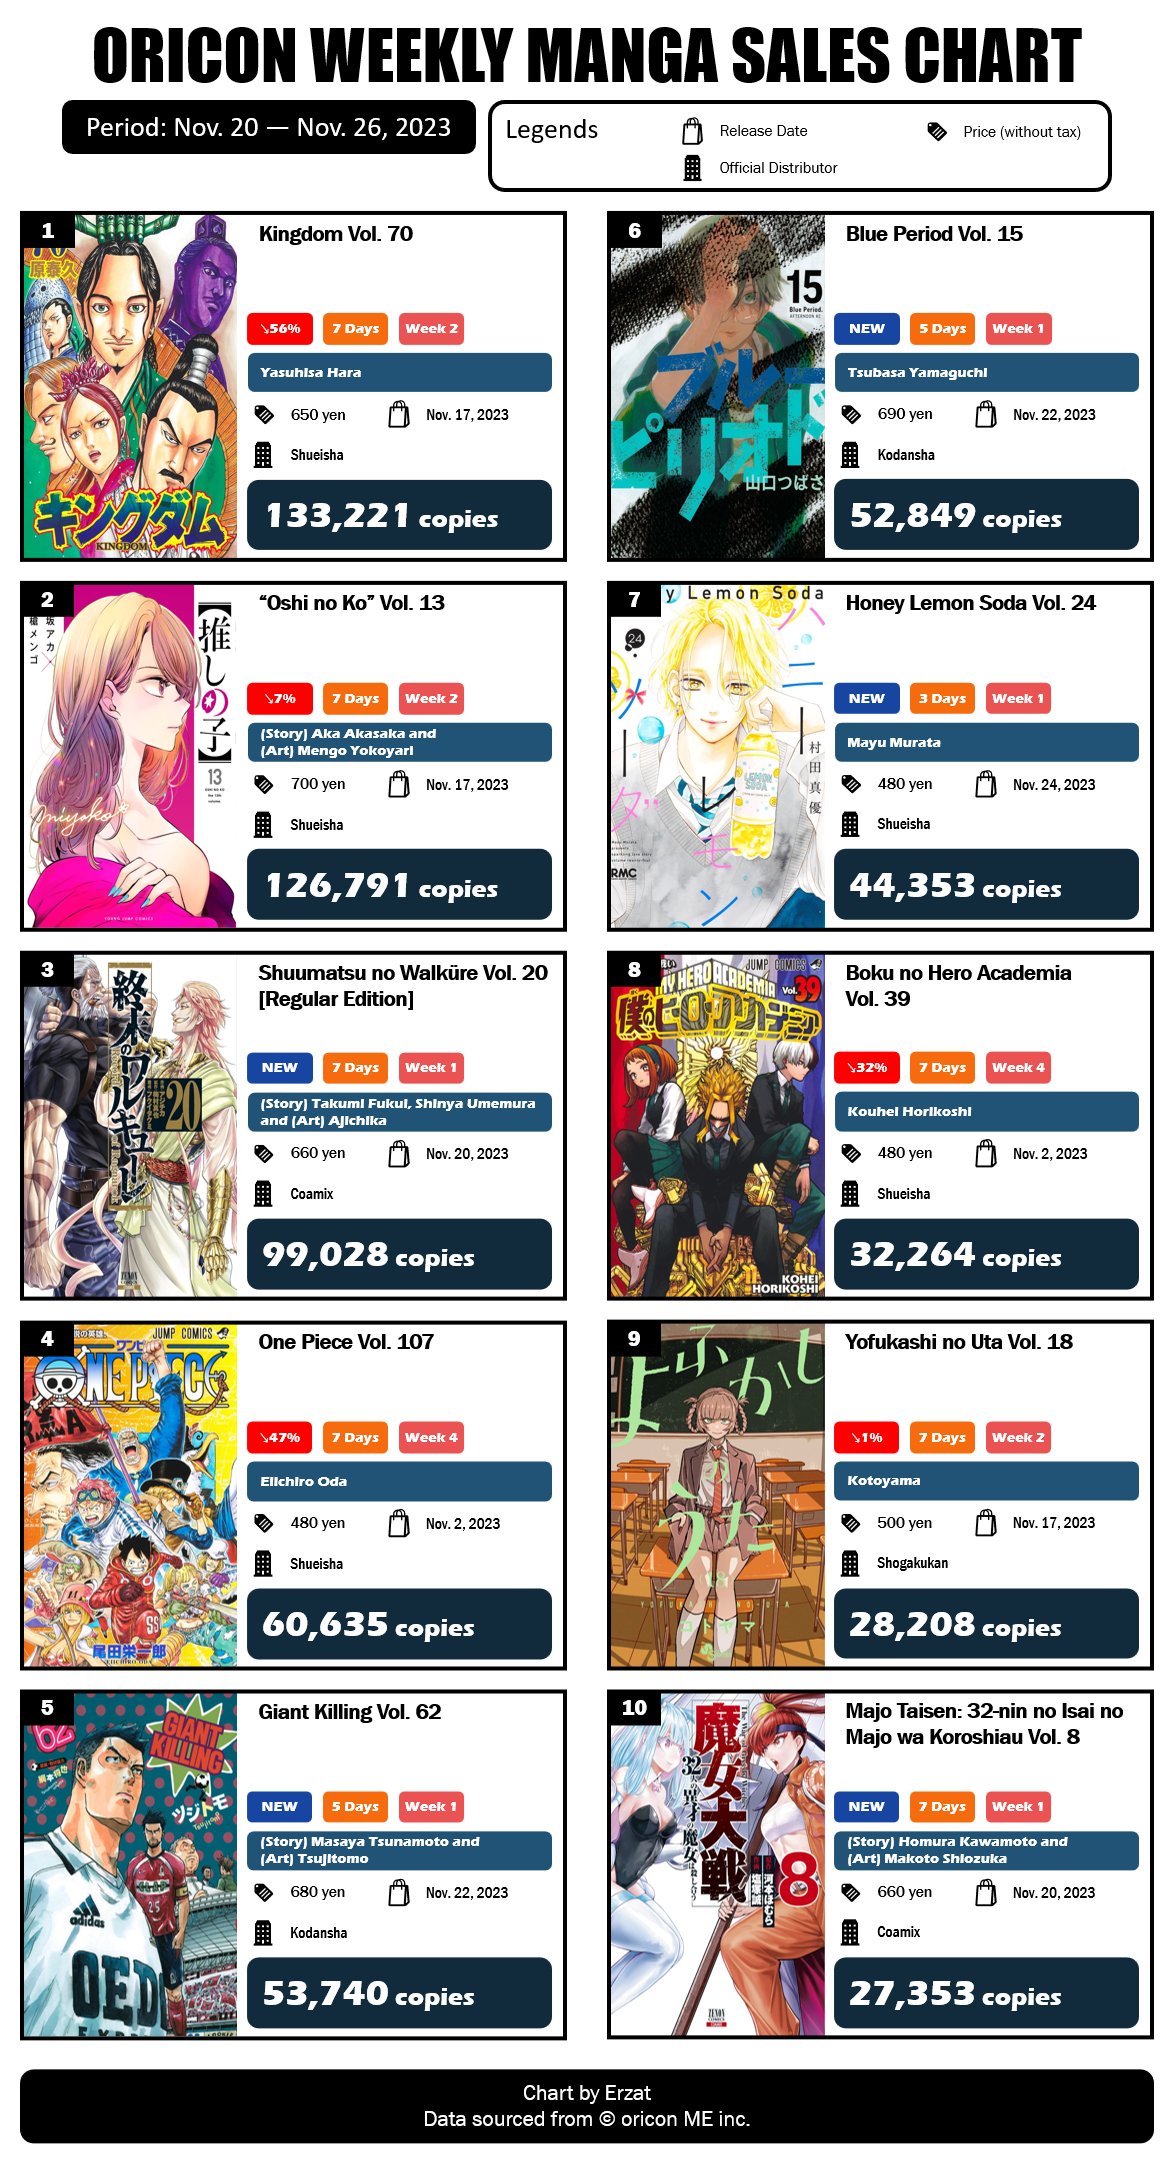 Japan Top Weekly Anime Blu-ray and DVD Ranking: March 29, 2021 ~ April 4,  2021 - Erzat